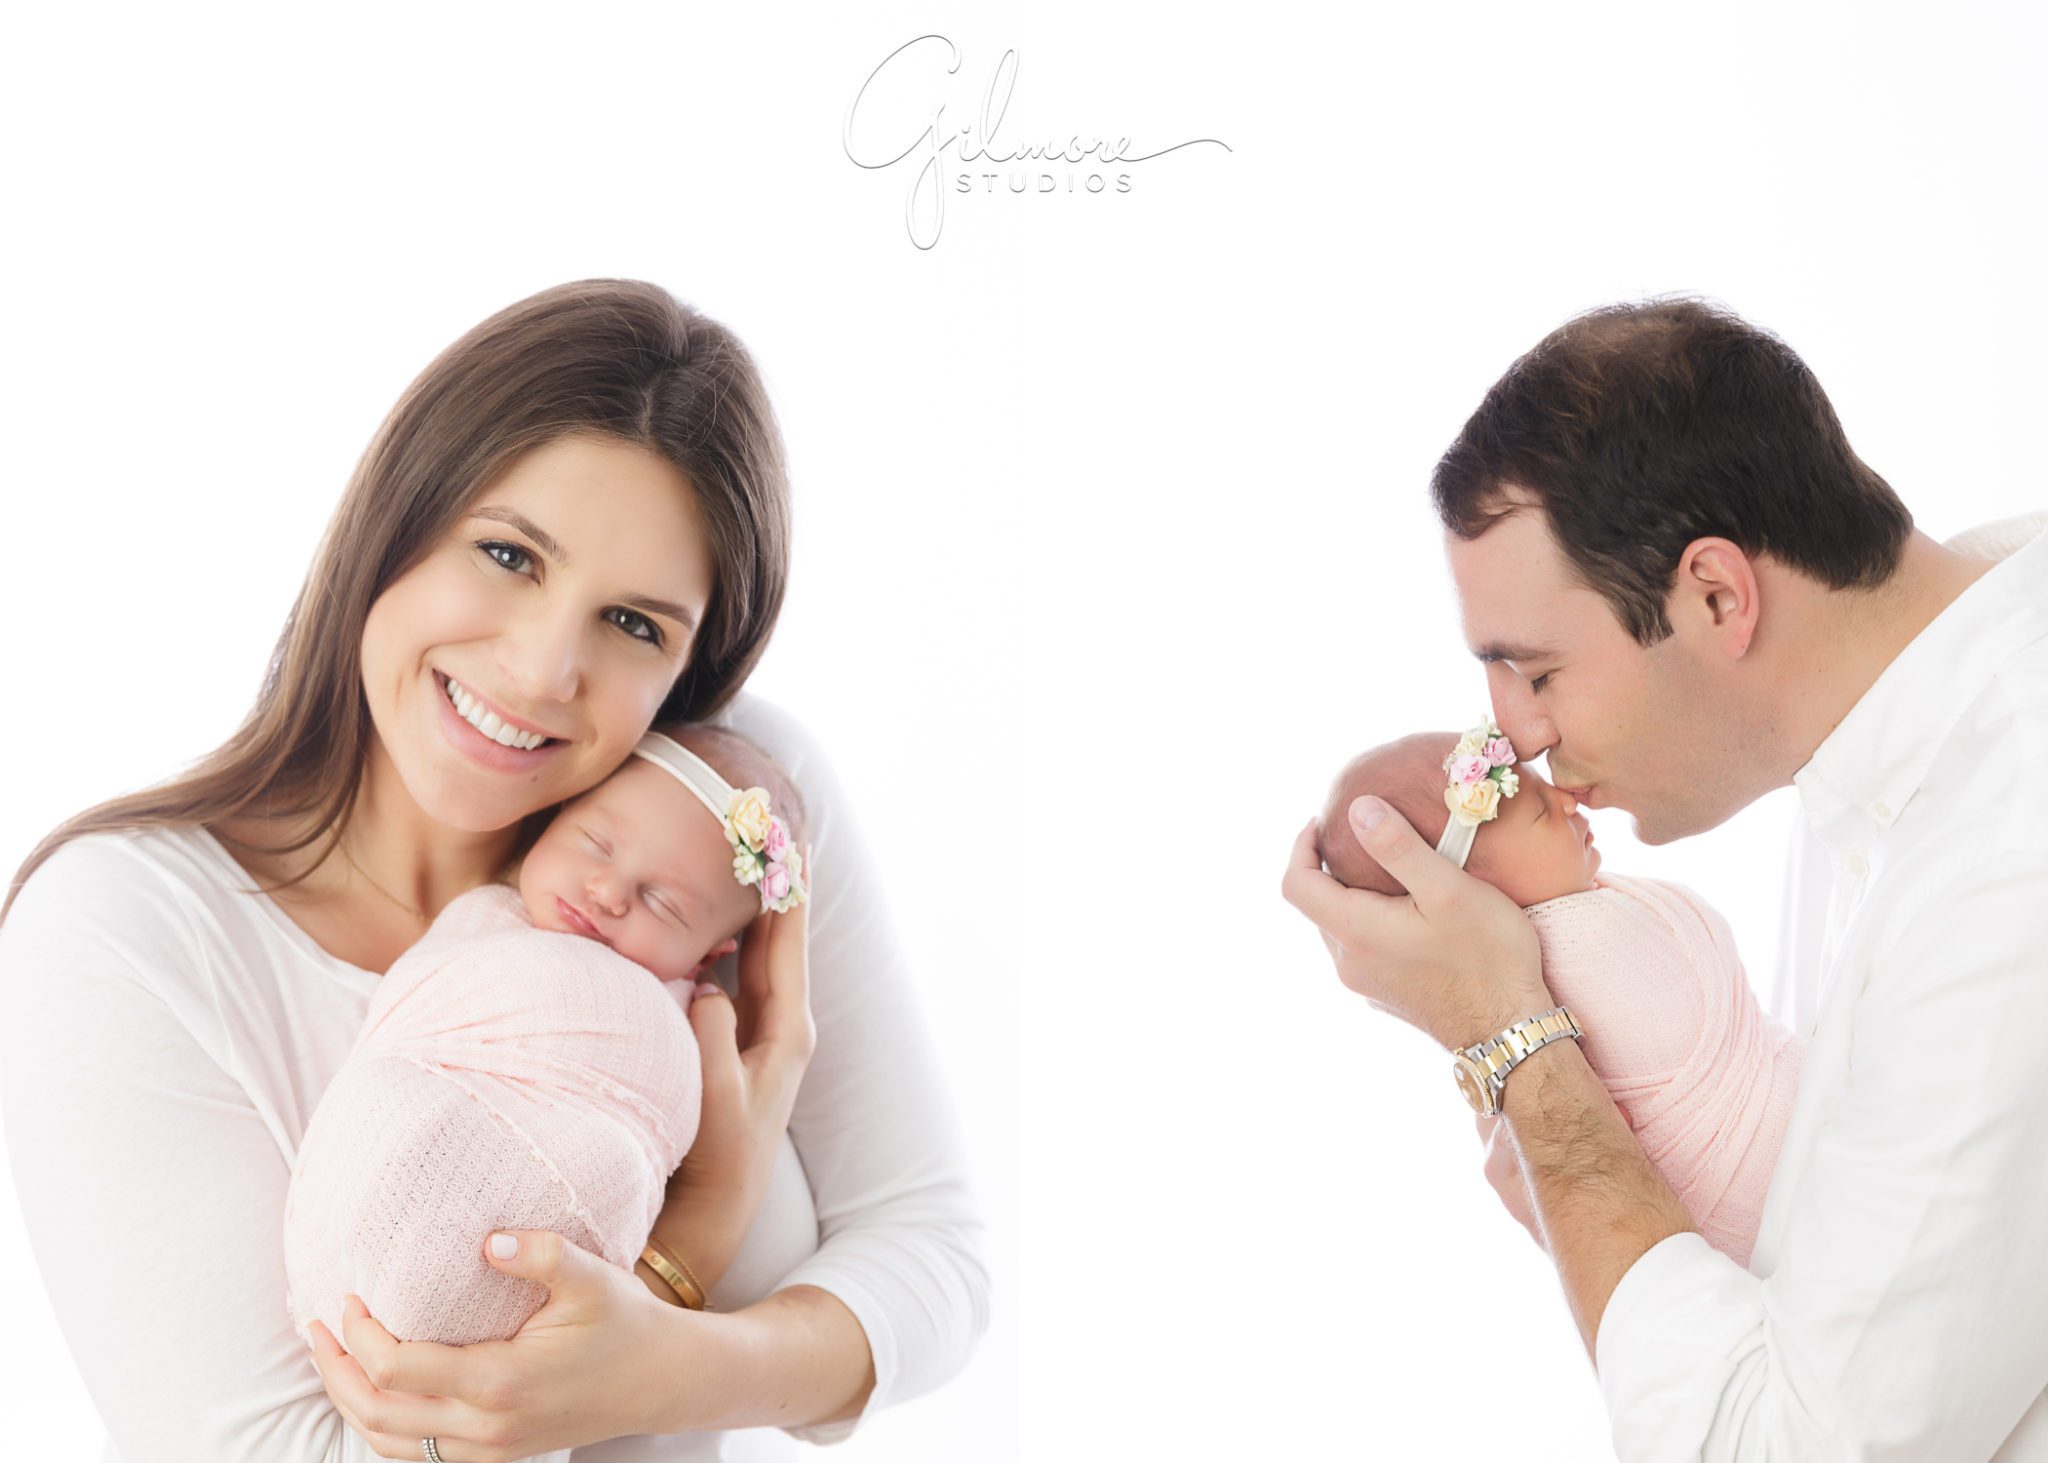 Maternity and Newborn Photography, family portraits, package, matching white outfits, pink blanket, flower headband, mom, dad, kiss, baby, studio session